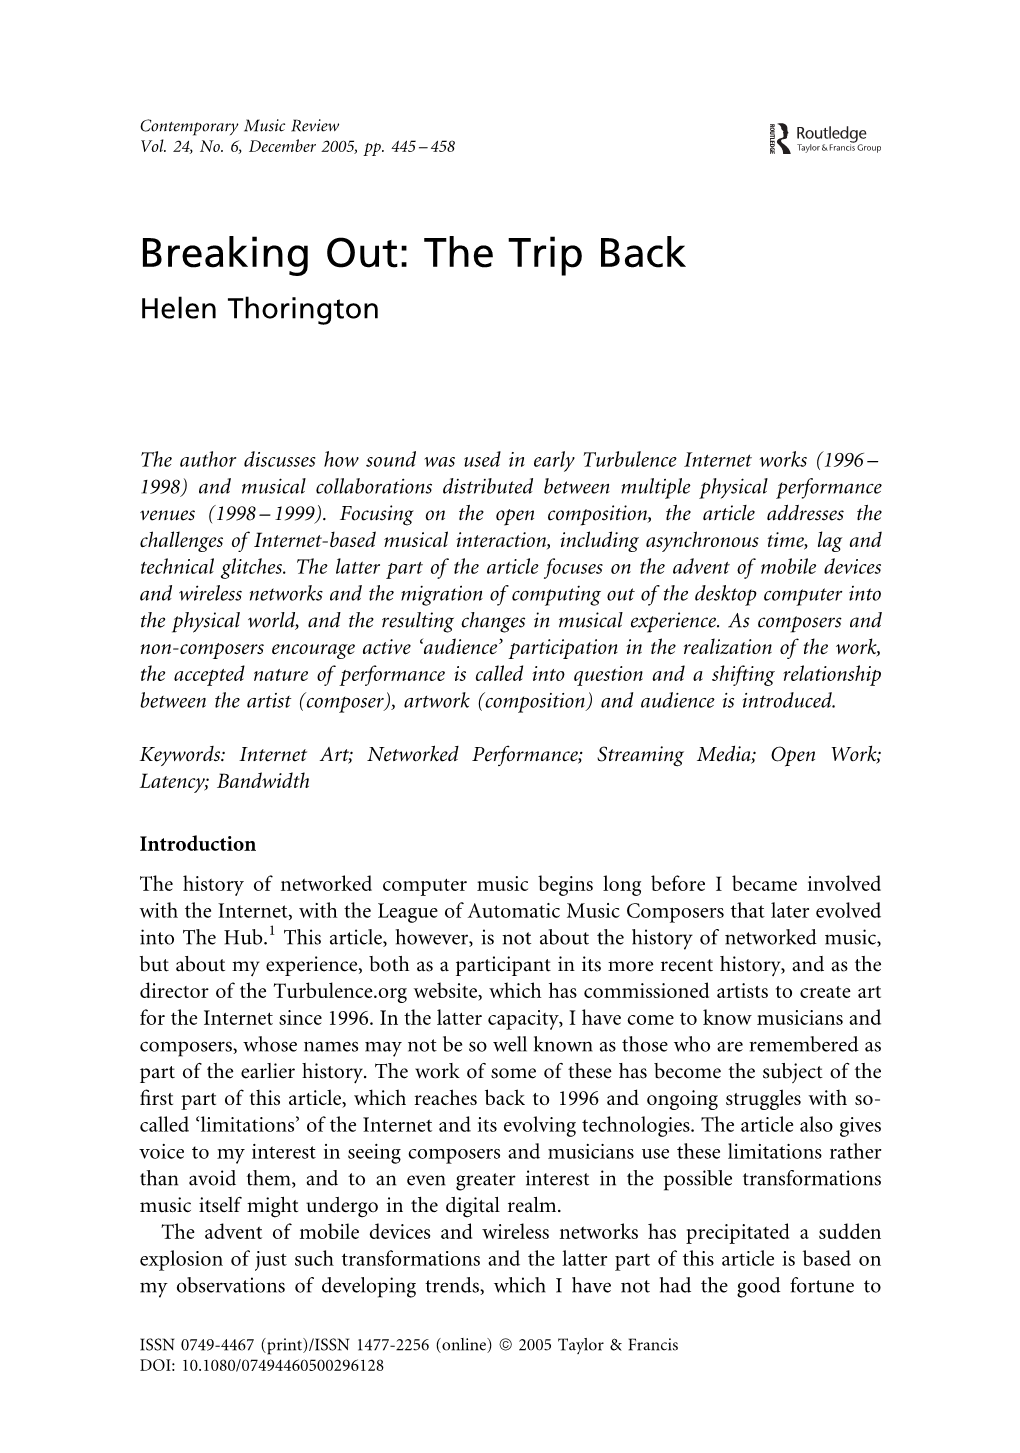 Helen Thorington, Breaking Out: the Trip Back